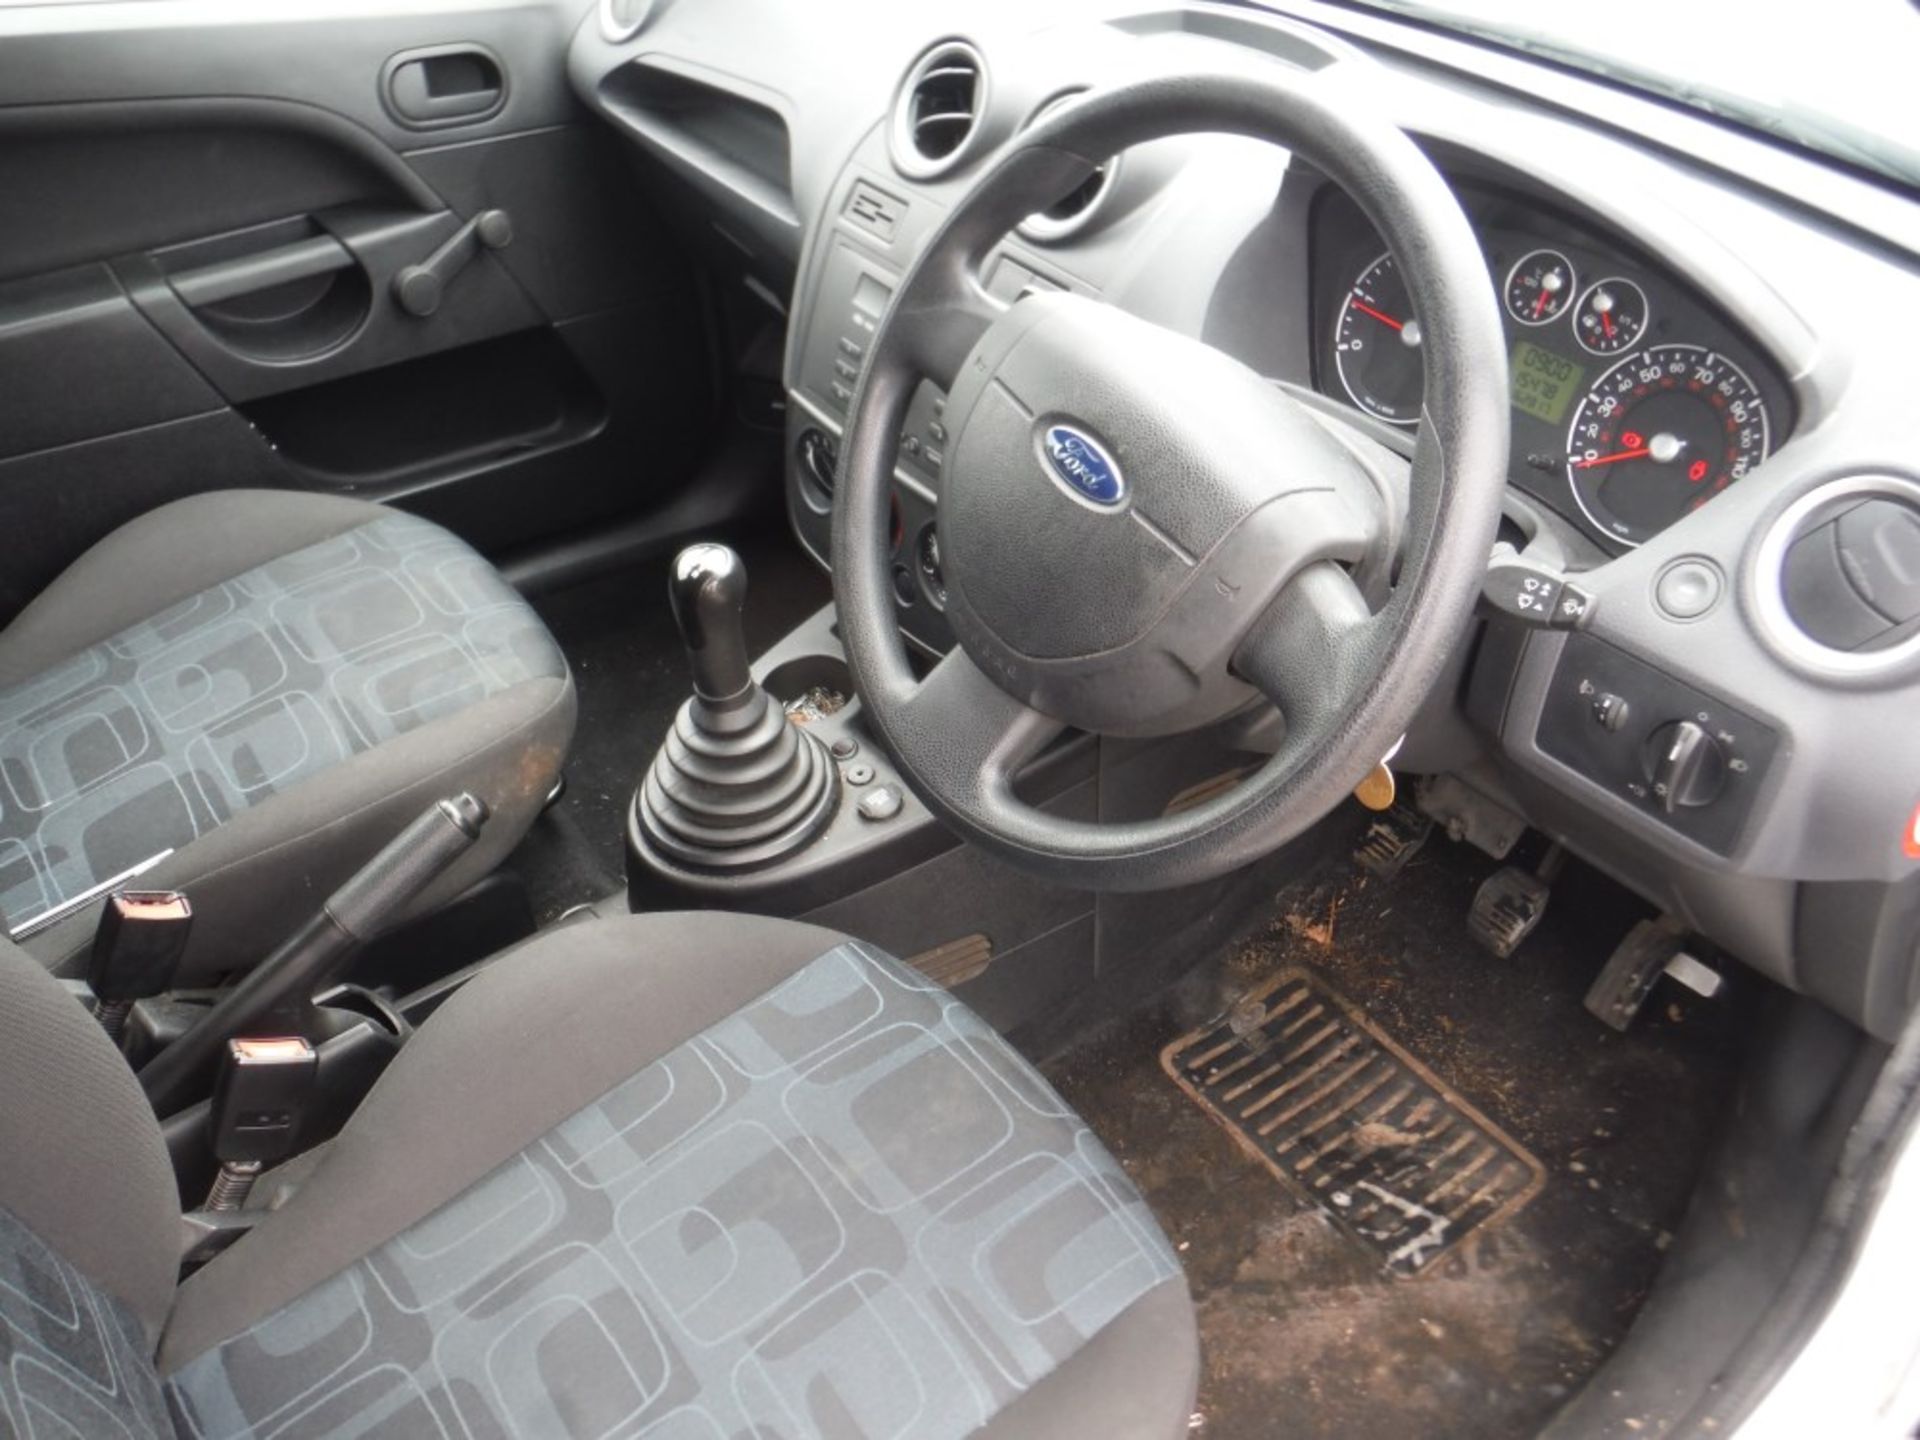 07 reg FORD FIESTA TDCI VAN, 1ST REG 05/07, 161824M, V5 HERE, 1OWNER FROM NEW (DIRECT COUNCIL) [+ - Image 5 of 5